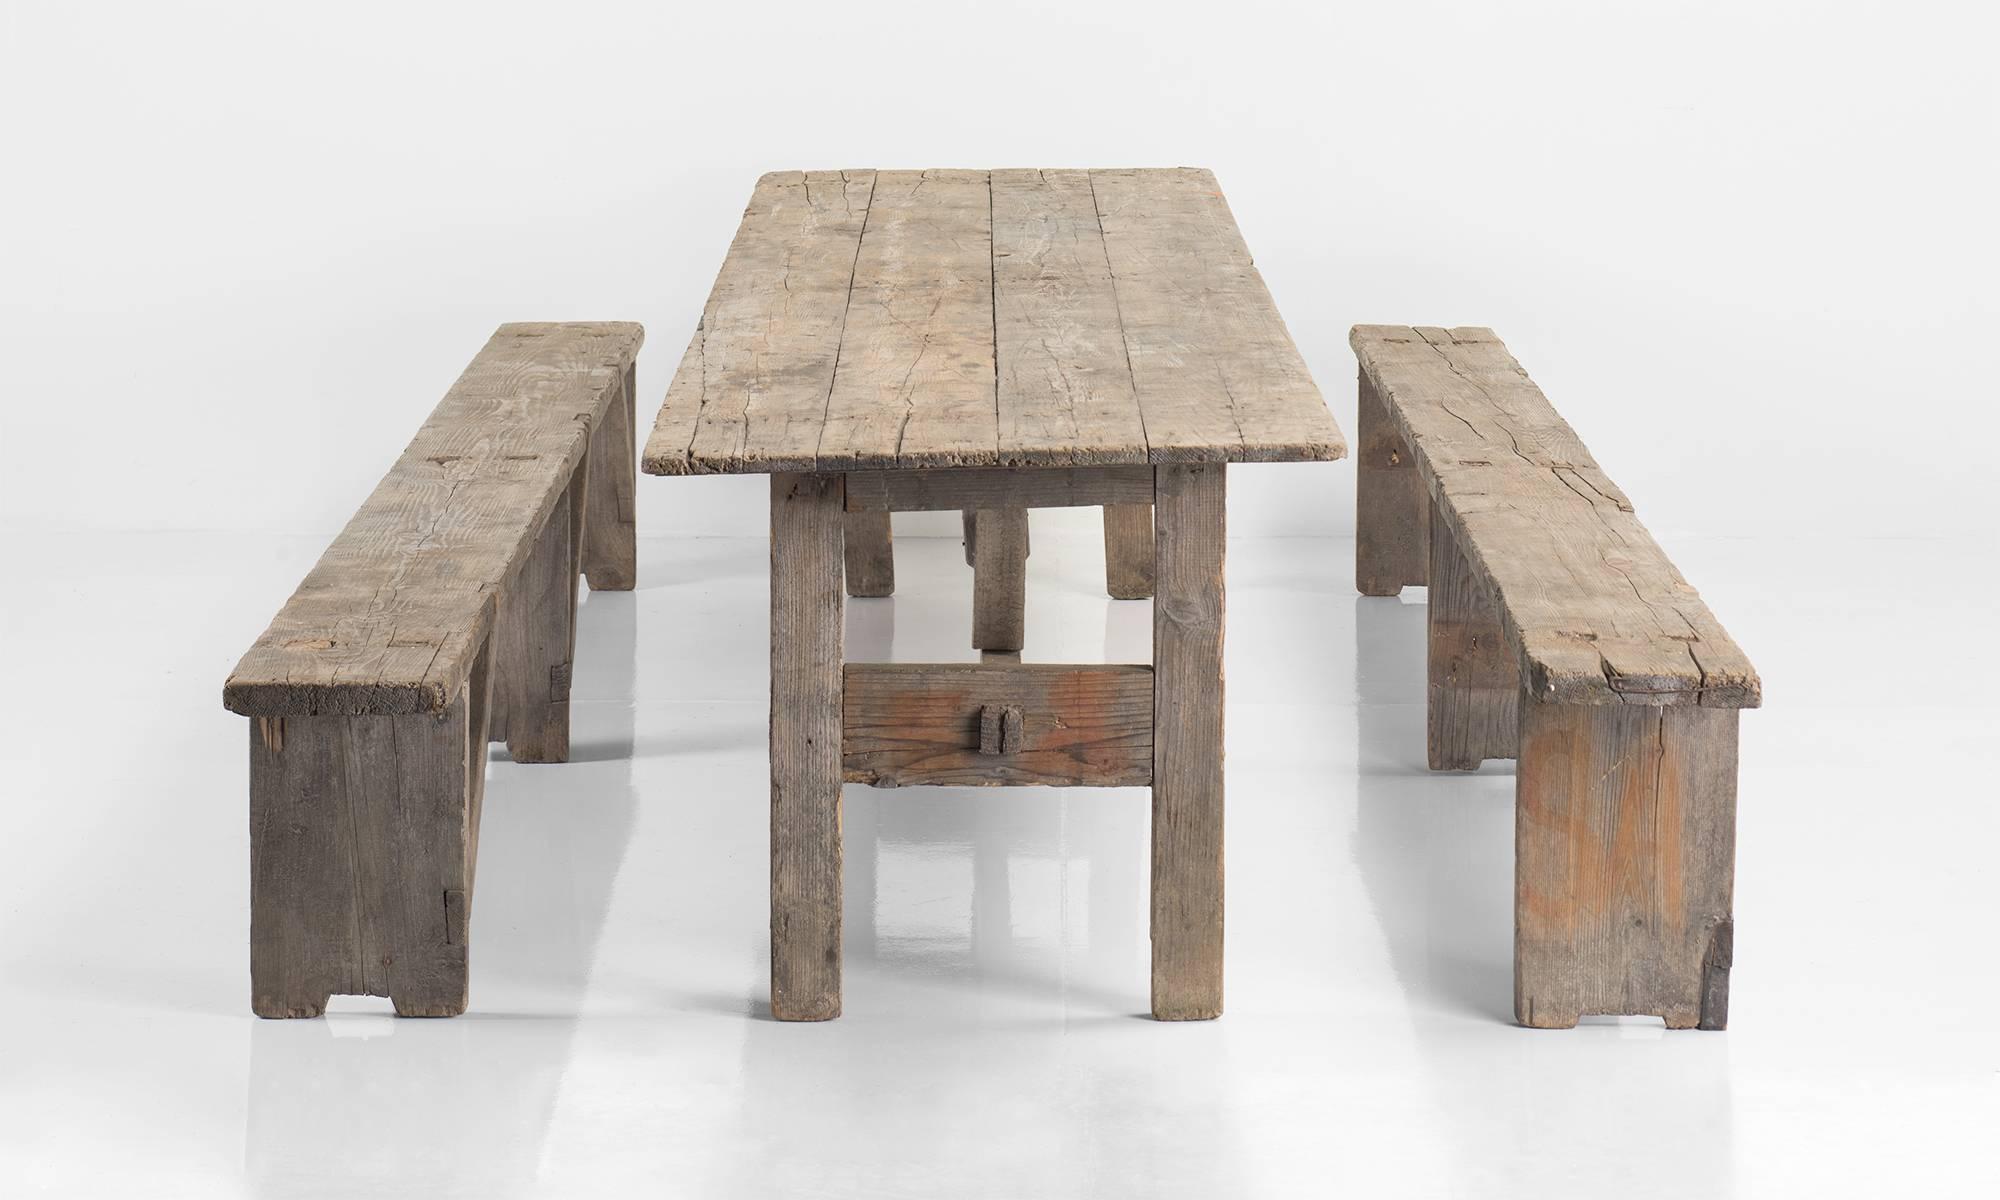 Italian Massive Pine Dining Table with Benches, circa 1900